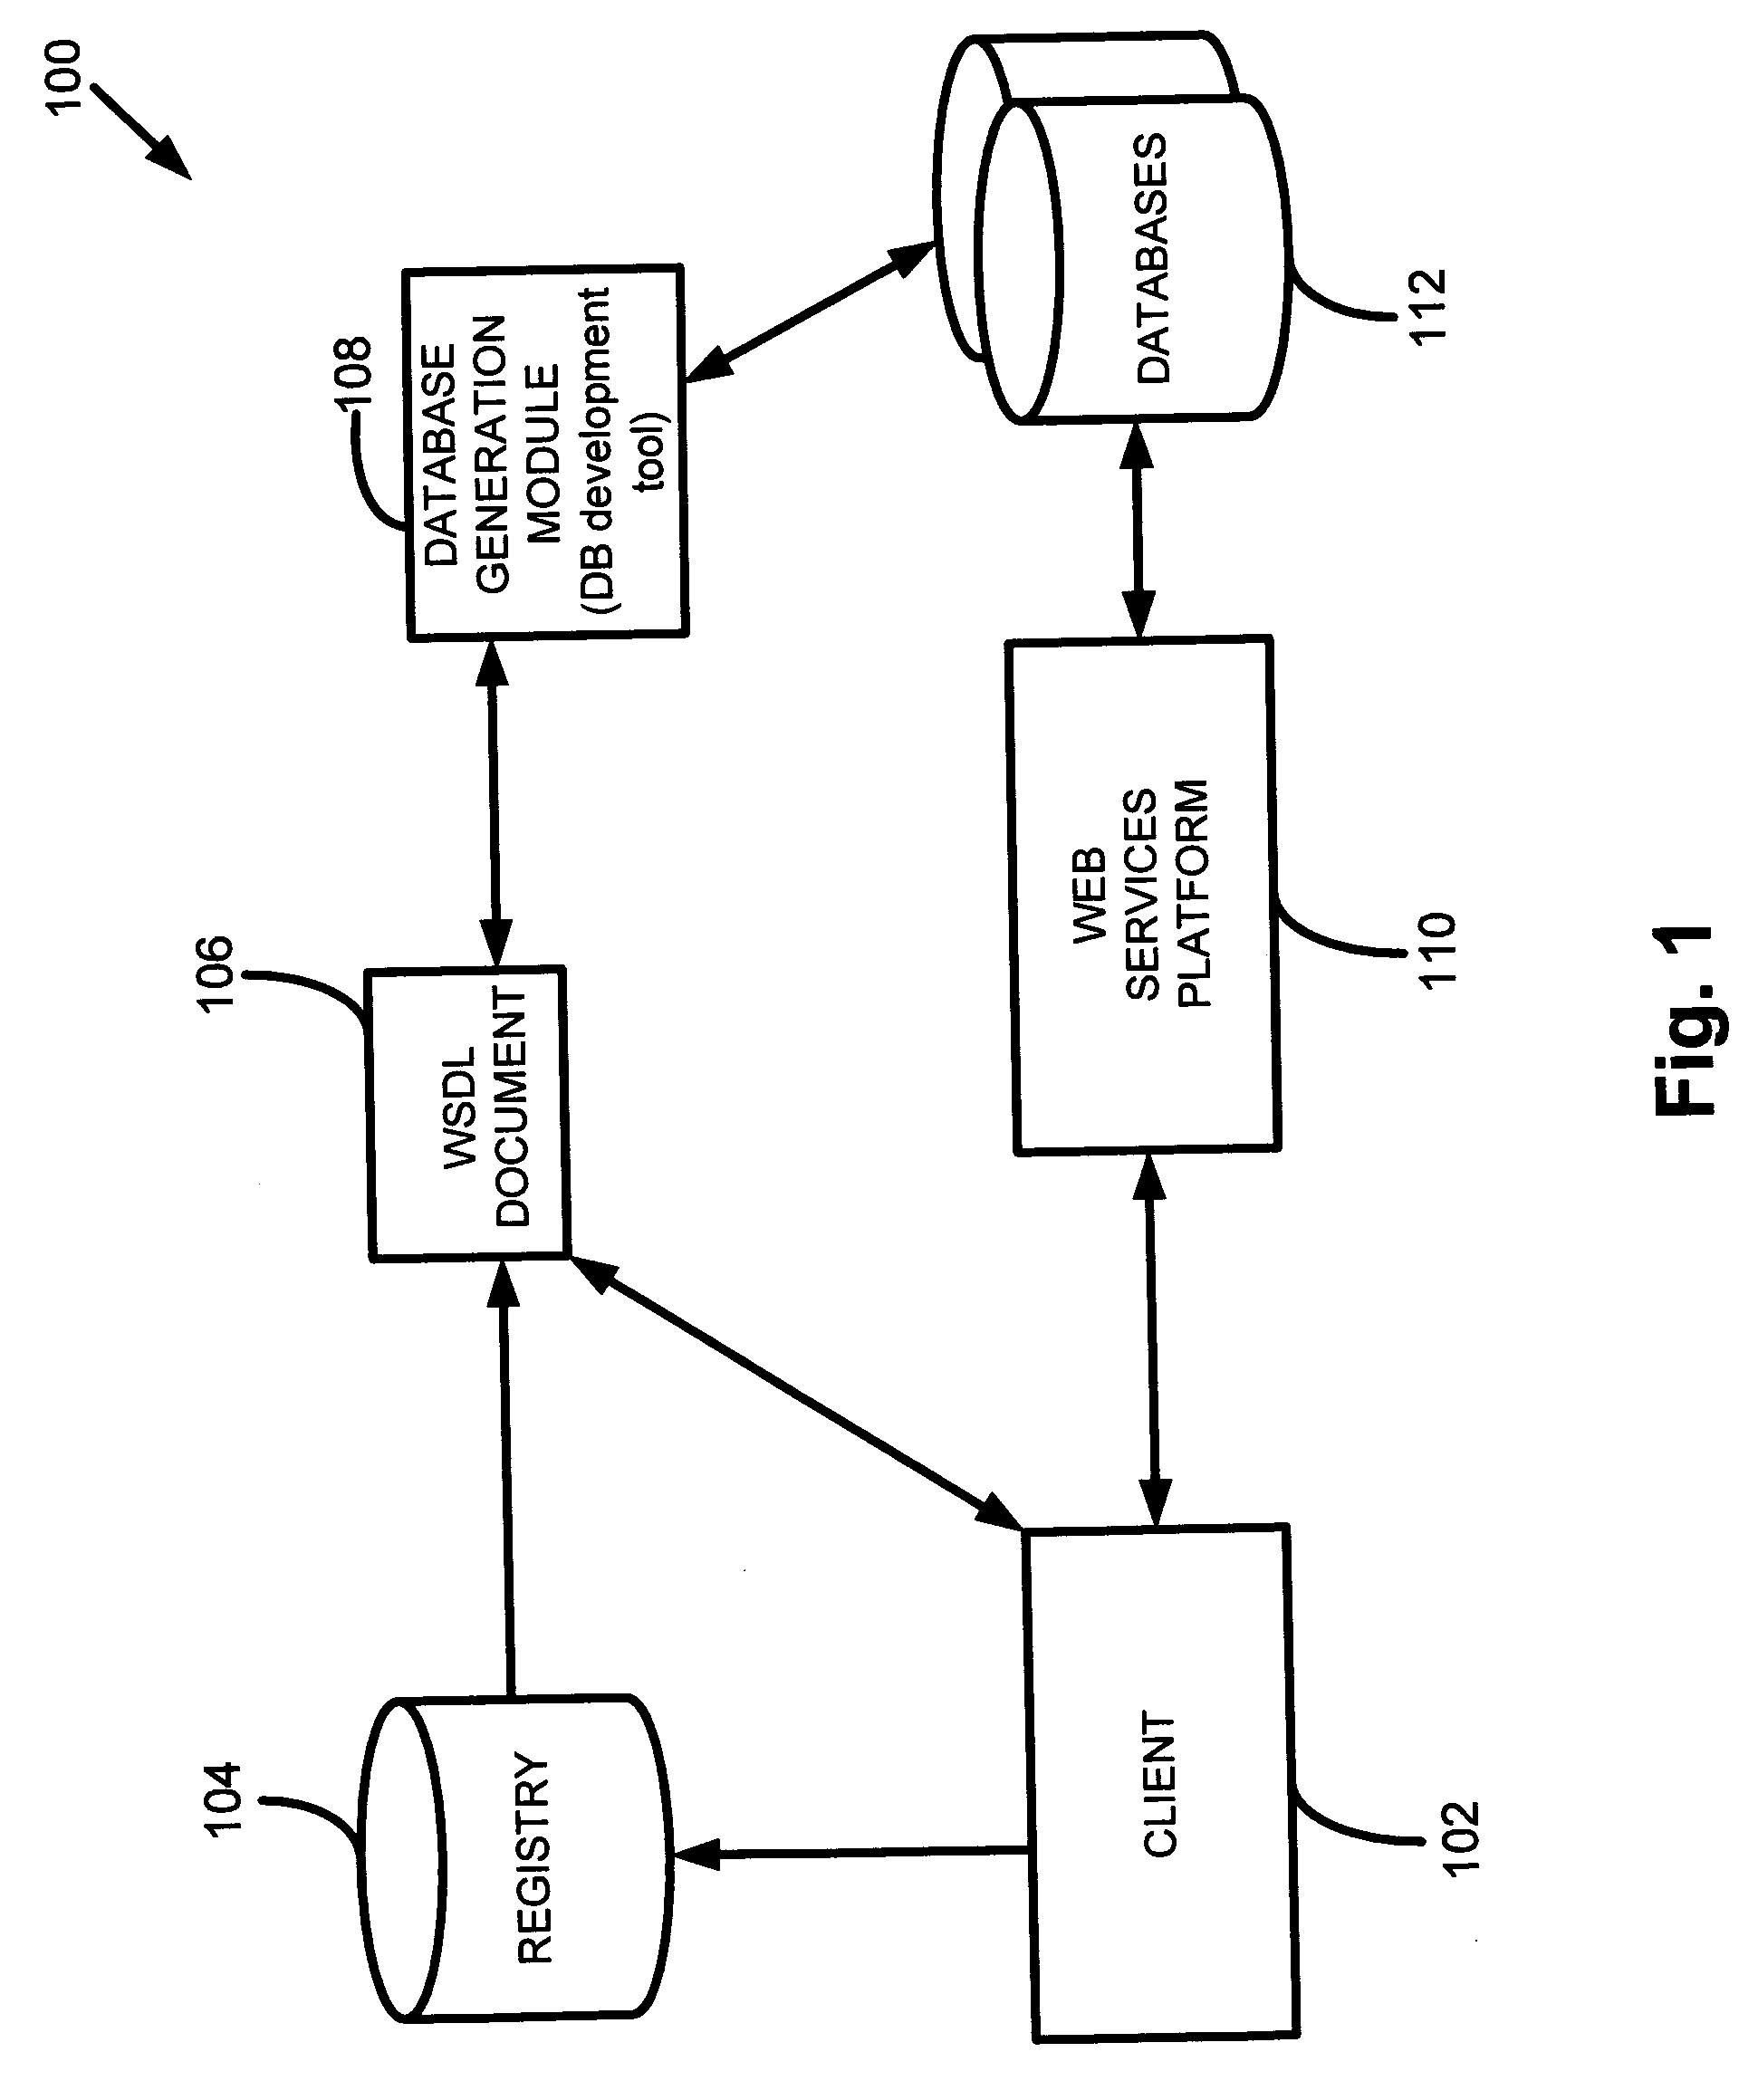 Method and apparatus for automated database creation from Web Services Description Language (WSDL)